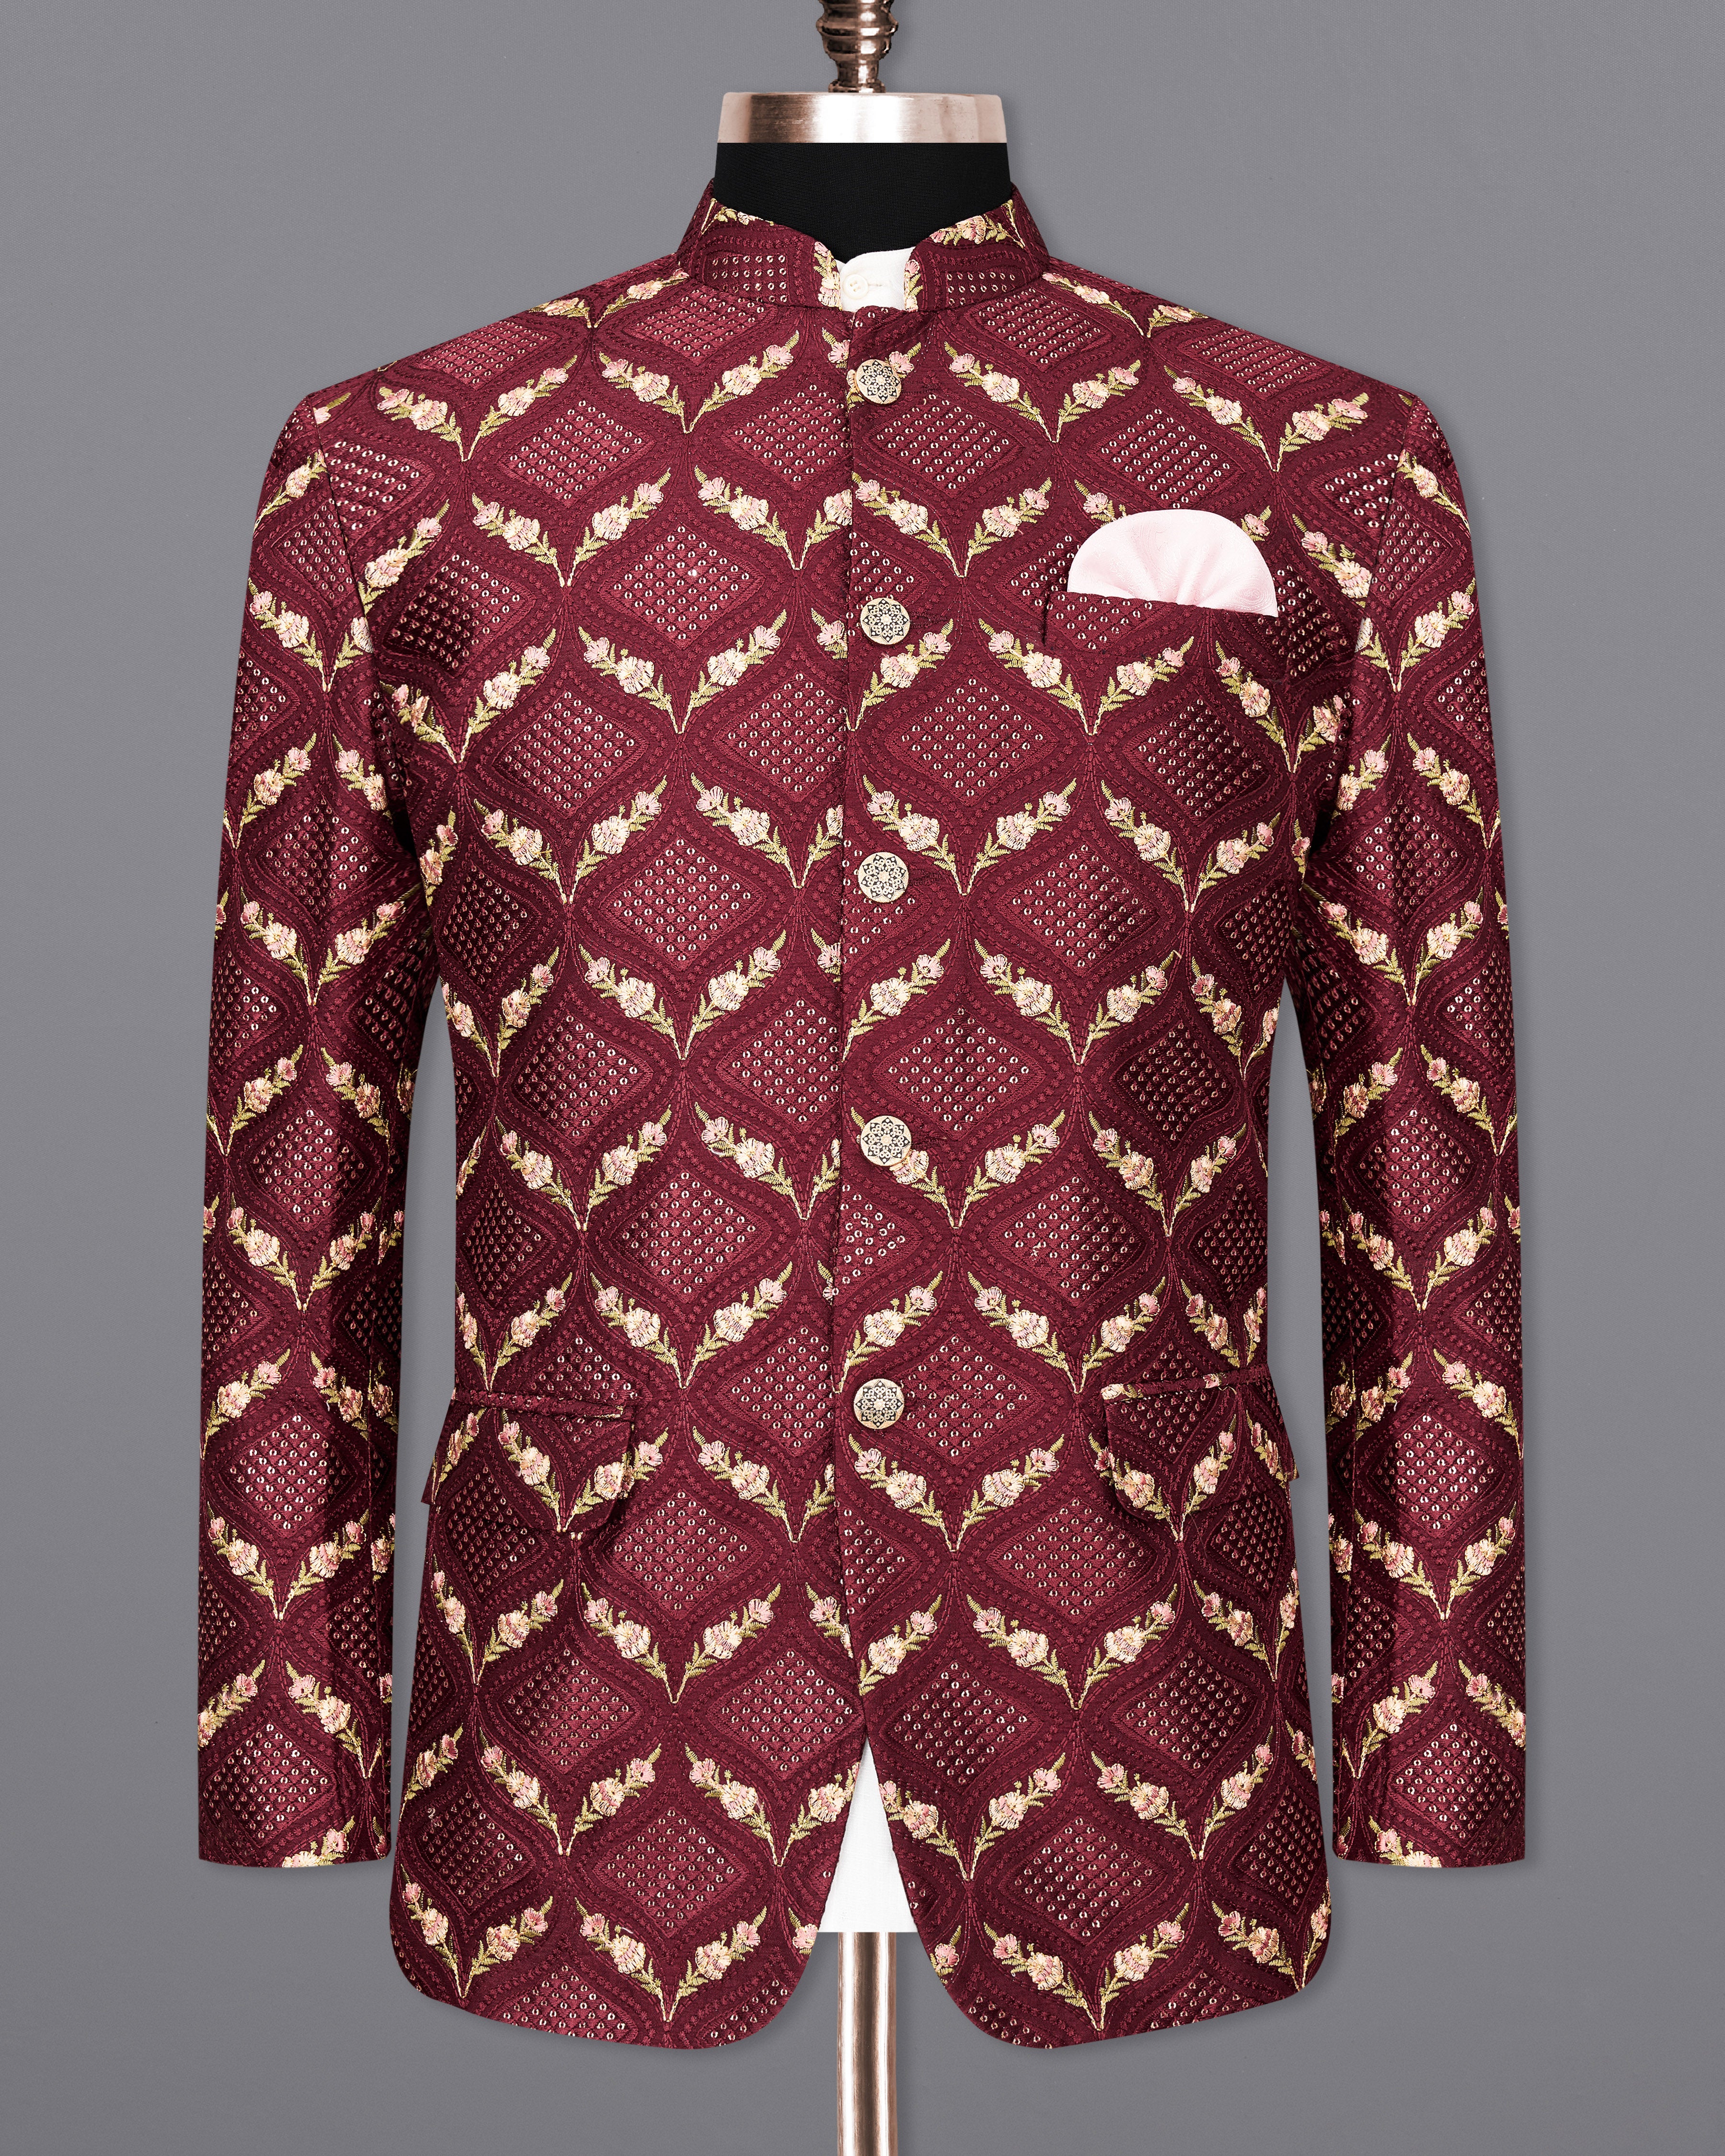 Wine with Lichen Green and Flamingo Pink Embroidered with Sequins Work Bandhgala Blazer BL2403-BG-36, BL2403-BG-38, BL2403-BG-40, BL2403-BG-42, BL2403-BG-44, BL2403-BG-46, BL2403-BG-48, BL2403-BG-50, BL2403-BG-52, BL2403-BG-54, BL2403-BG-56, BL2403-BG-58, BL2403-BG-60	